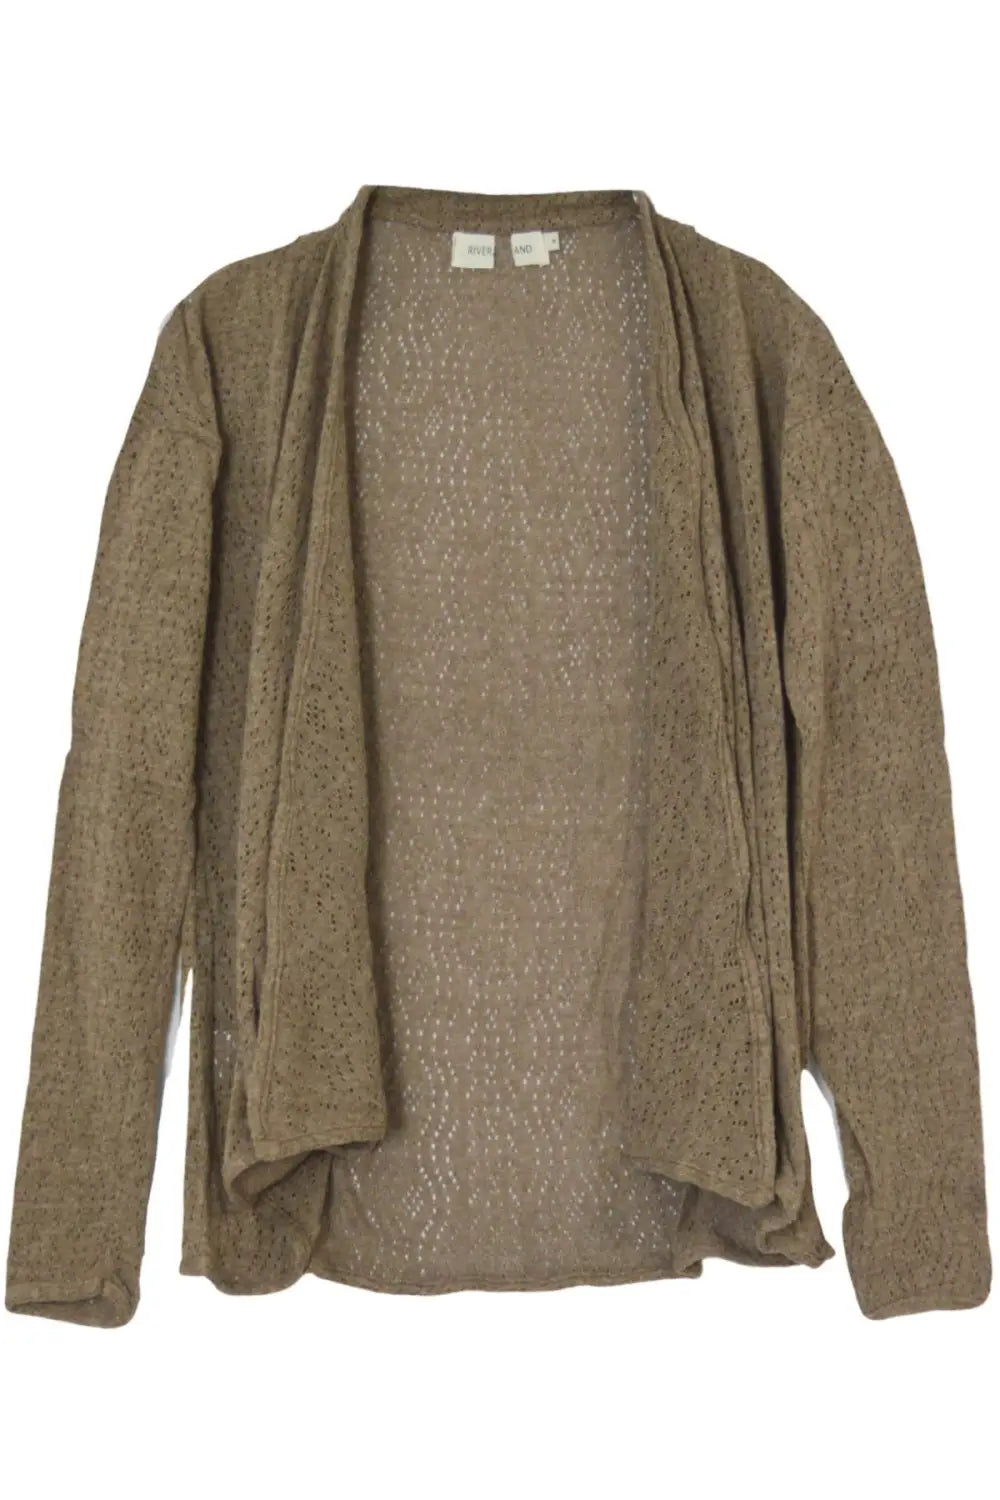 River Island Pointelle Open Front Cardigan